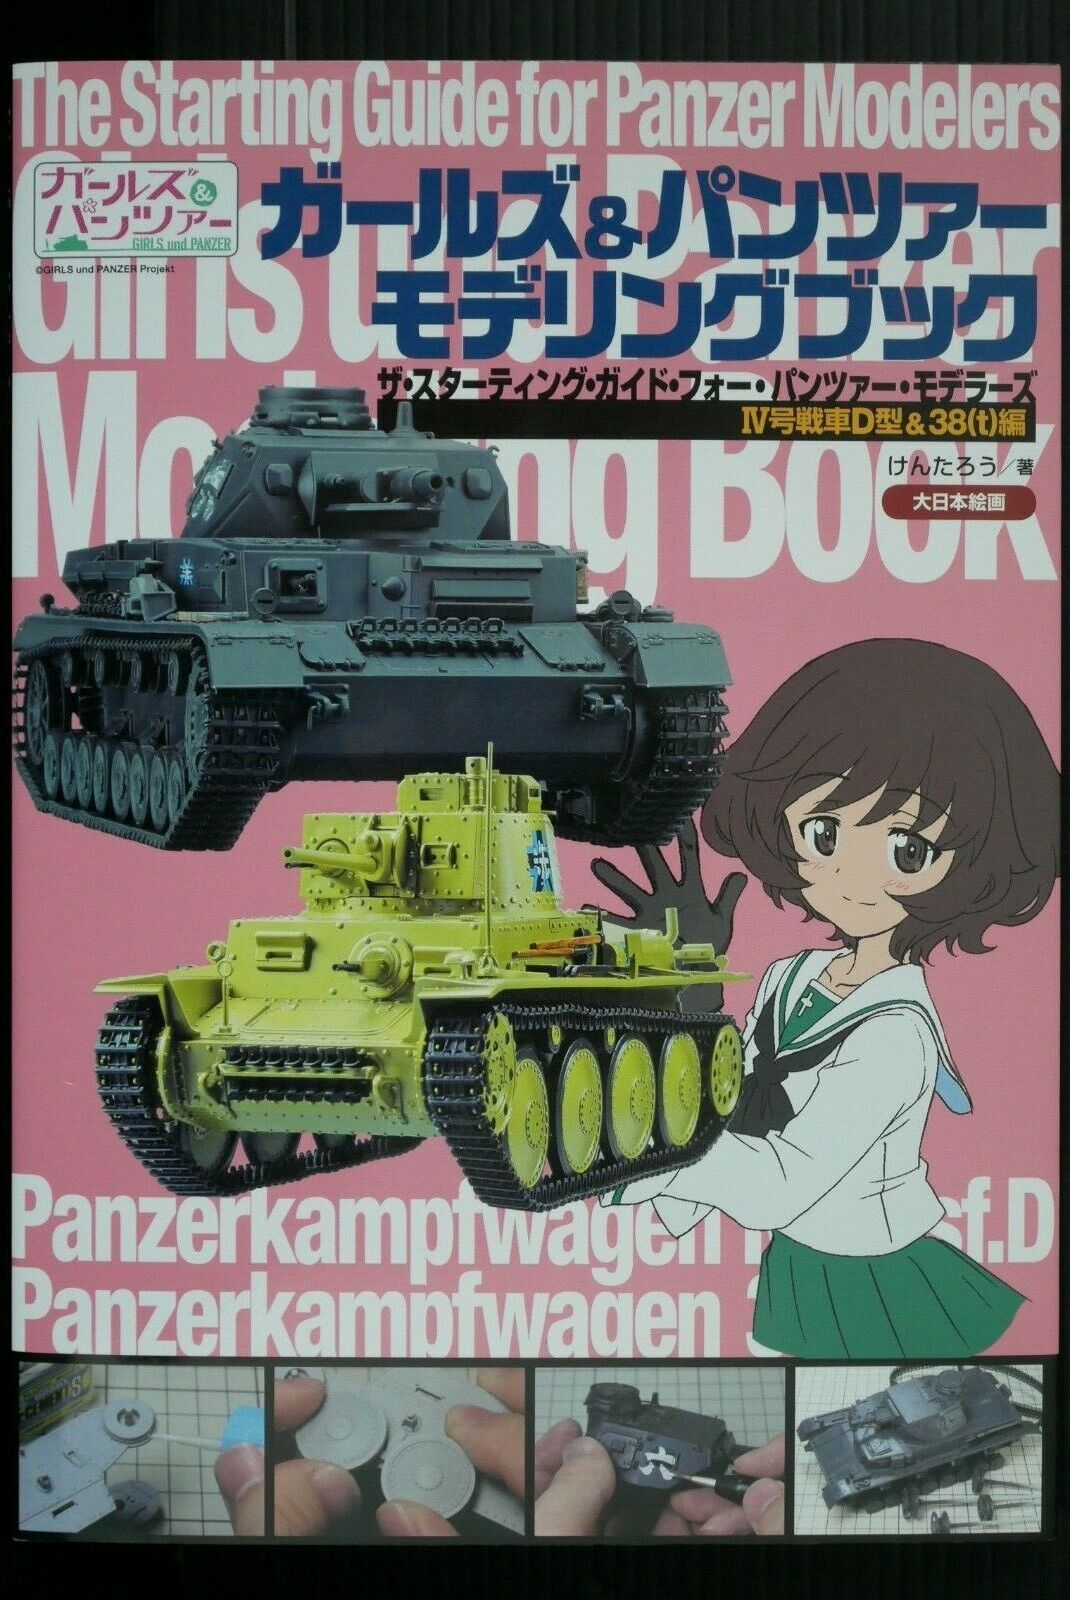 JAPAN The Starting Guide for Girls und Panzer Modelers Girls und Panzer Modeling